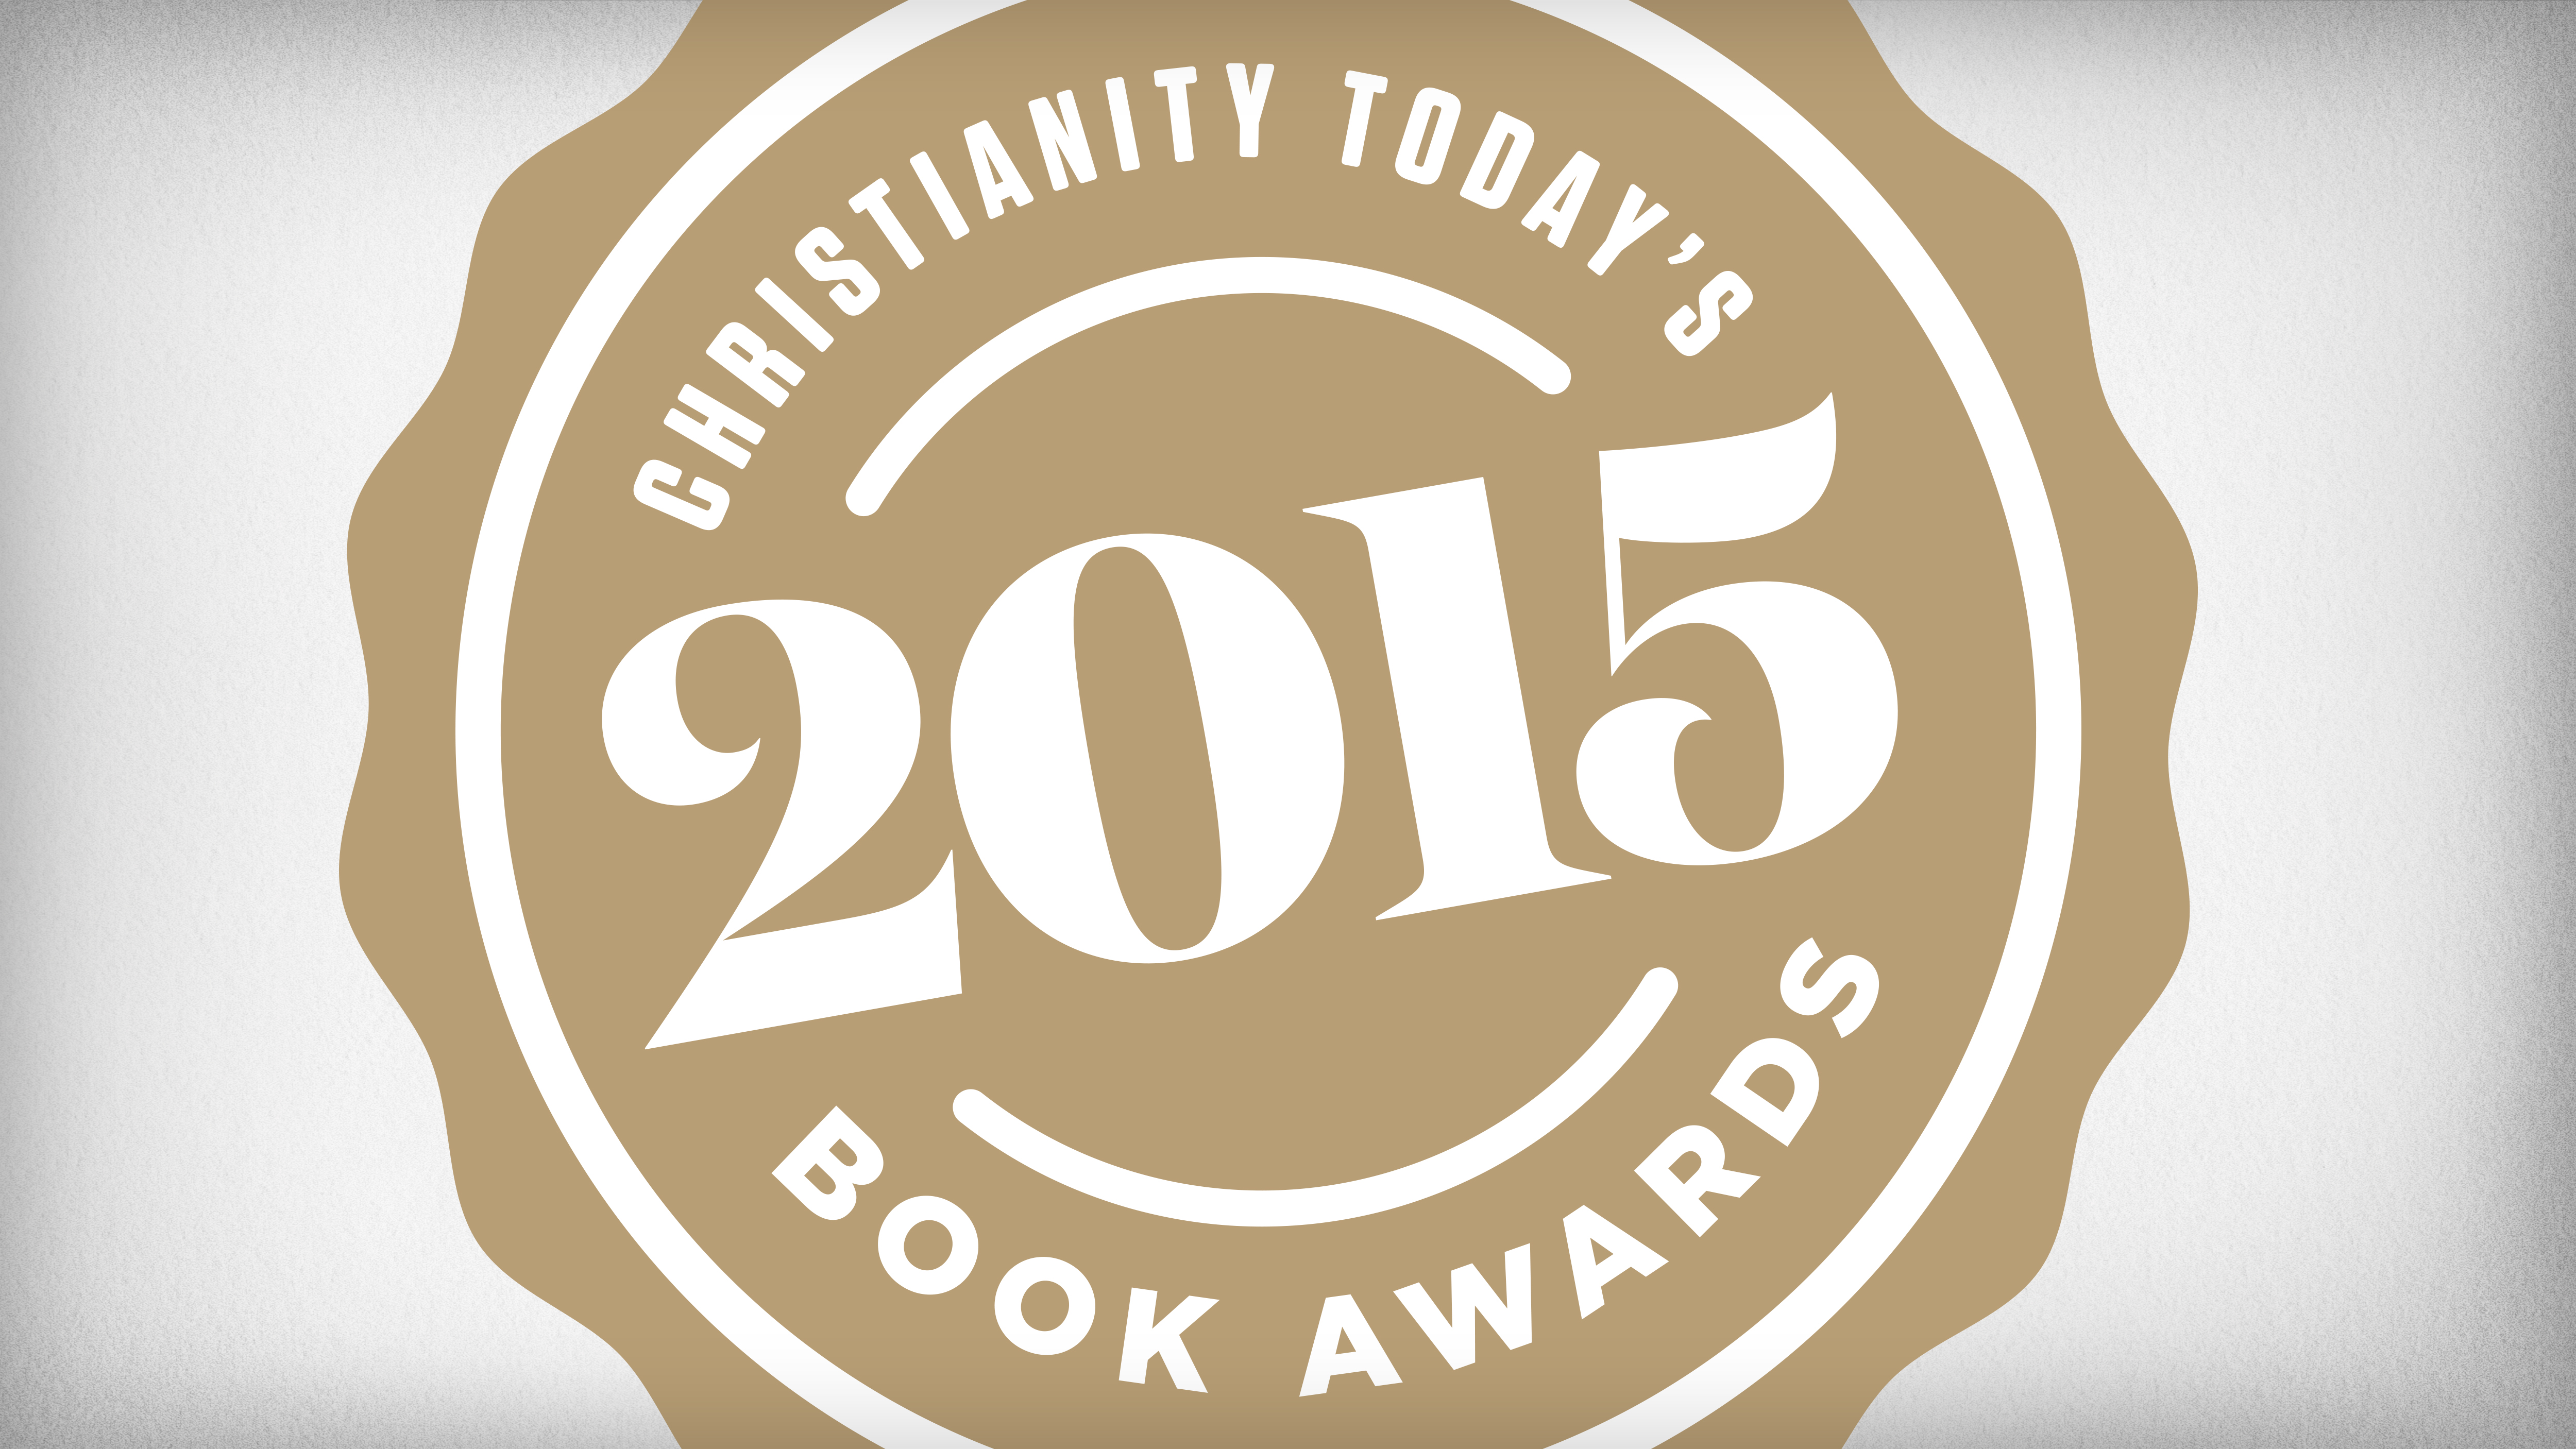 Christianity Today's 2015 Book Awards | Christianity Today